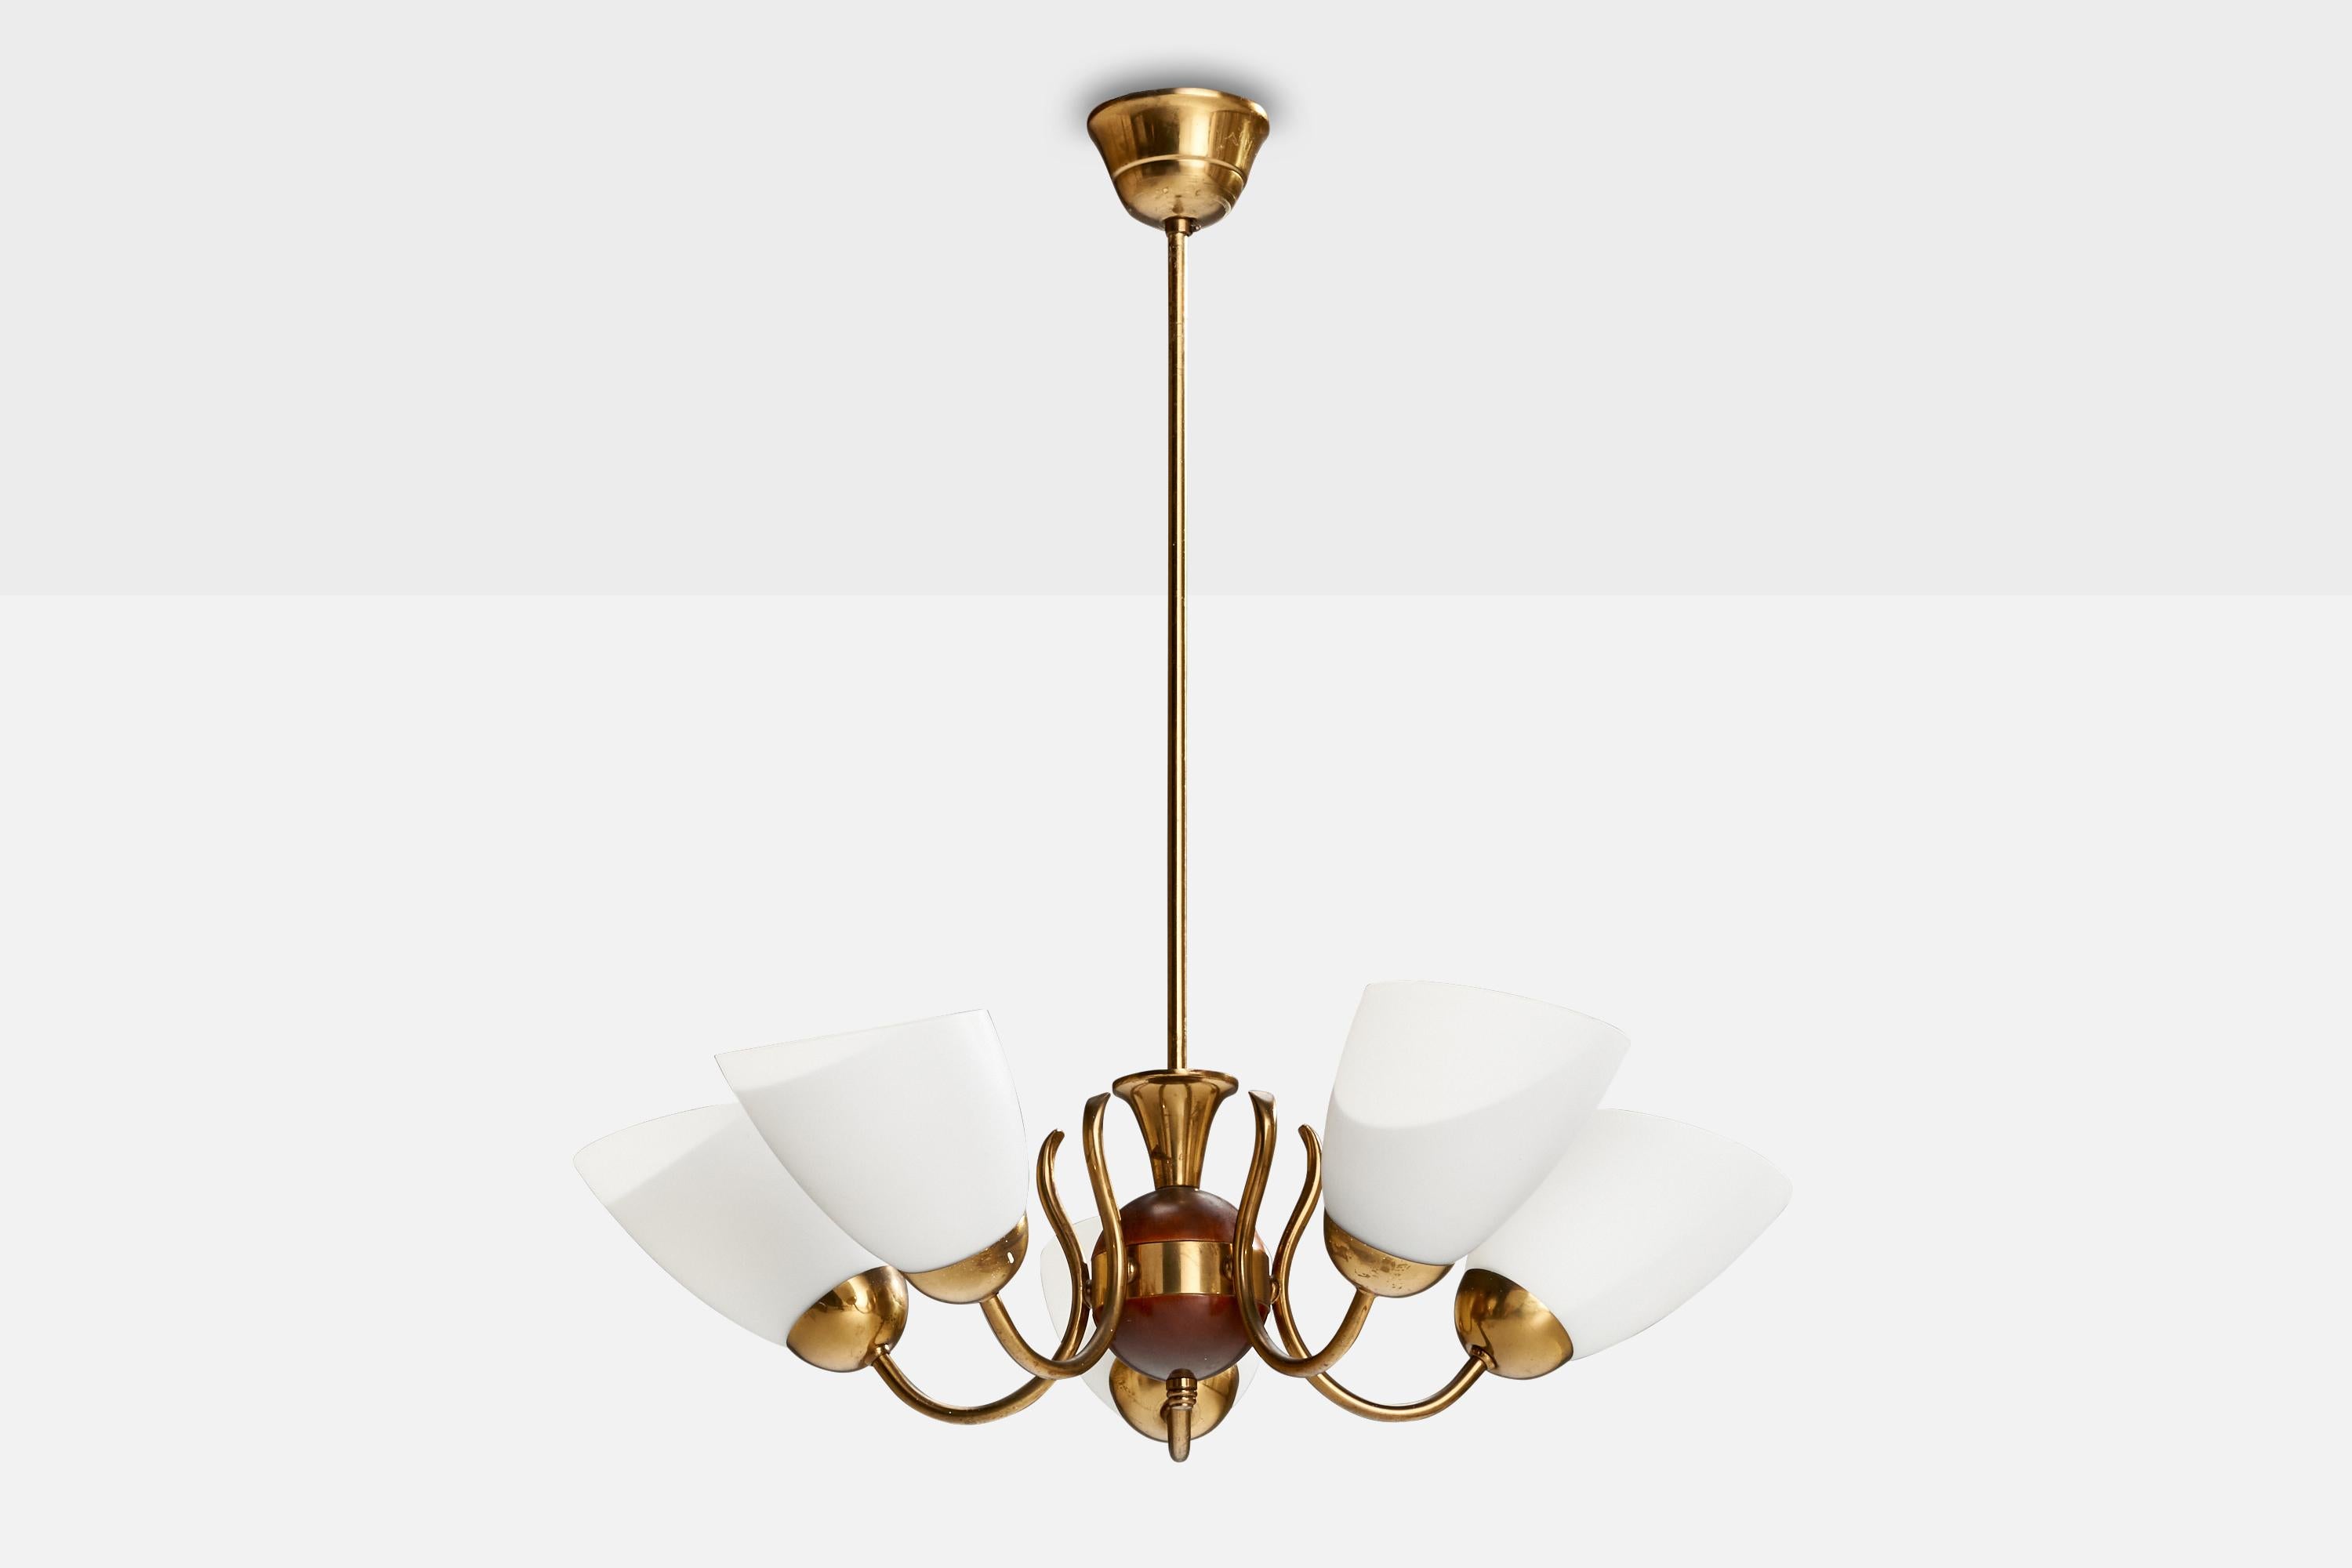 A brass, wood and opaline glass chandelier designed and produced in Sweden, c. 1940s.

Dimensions of canopy (inches): 2.47” H x 3.68” Diameter
Socket takes standard E-26 bulbs. 5 socket.There is no maximum wattage stated on the fixture. All lighting